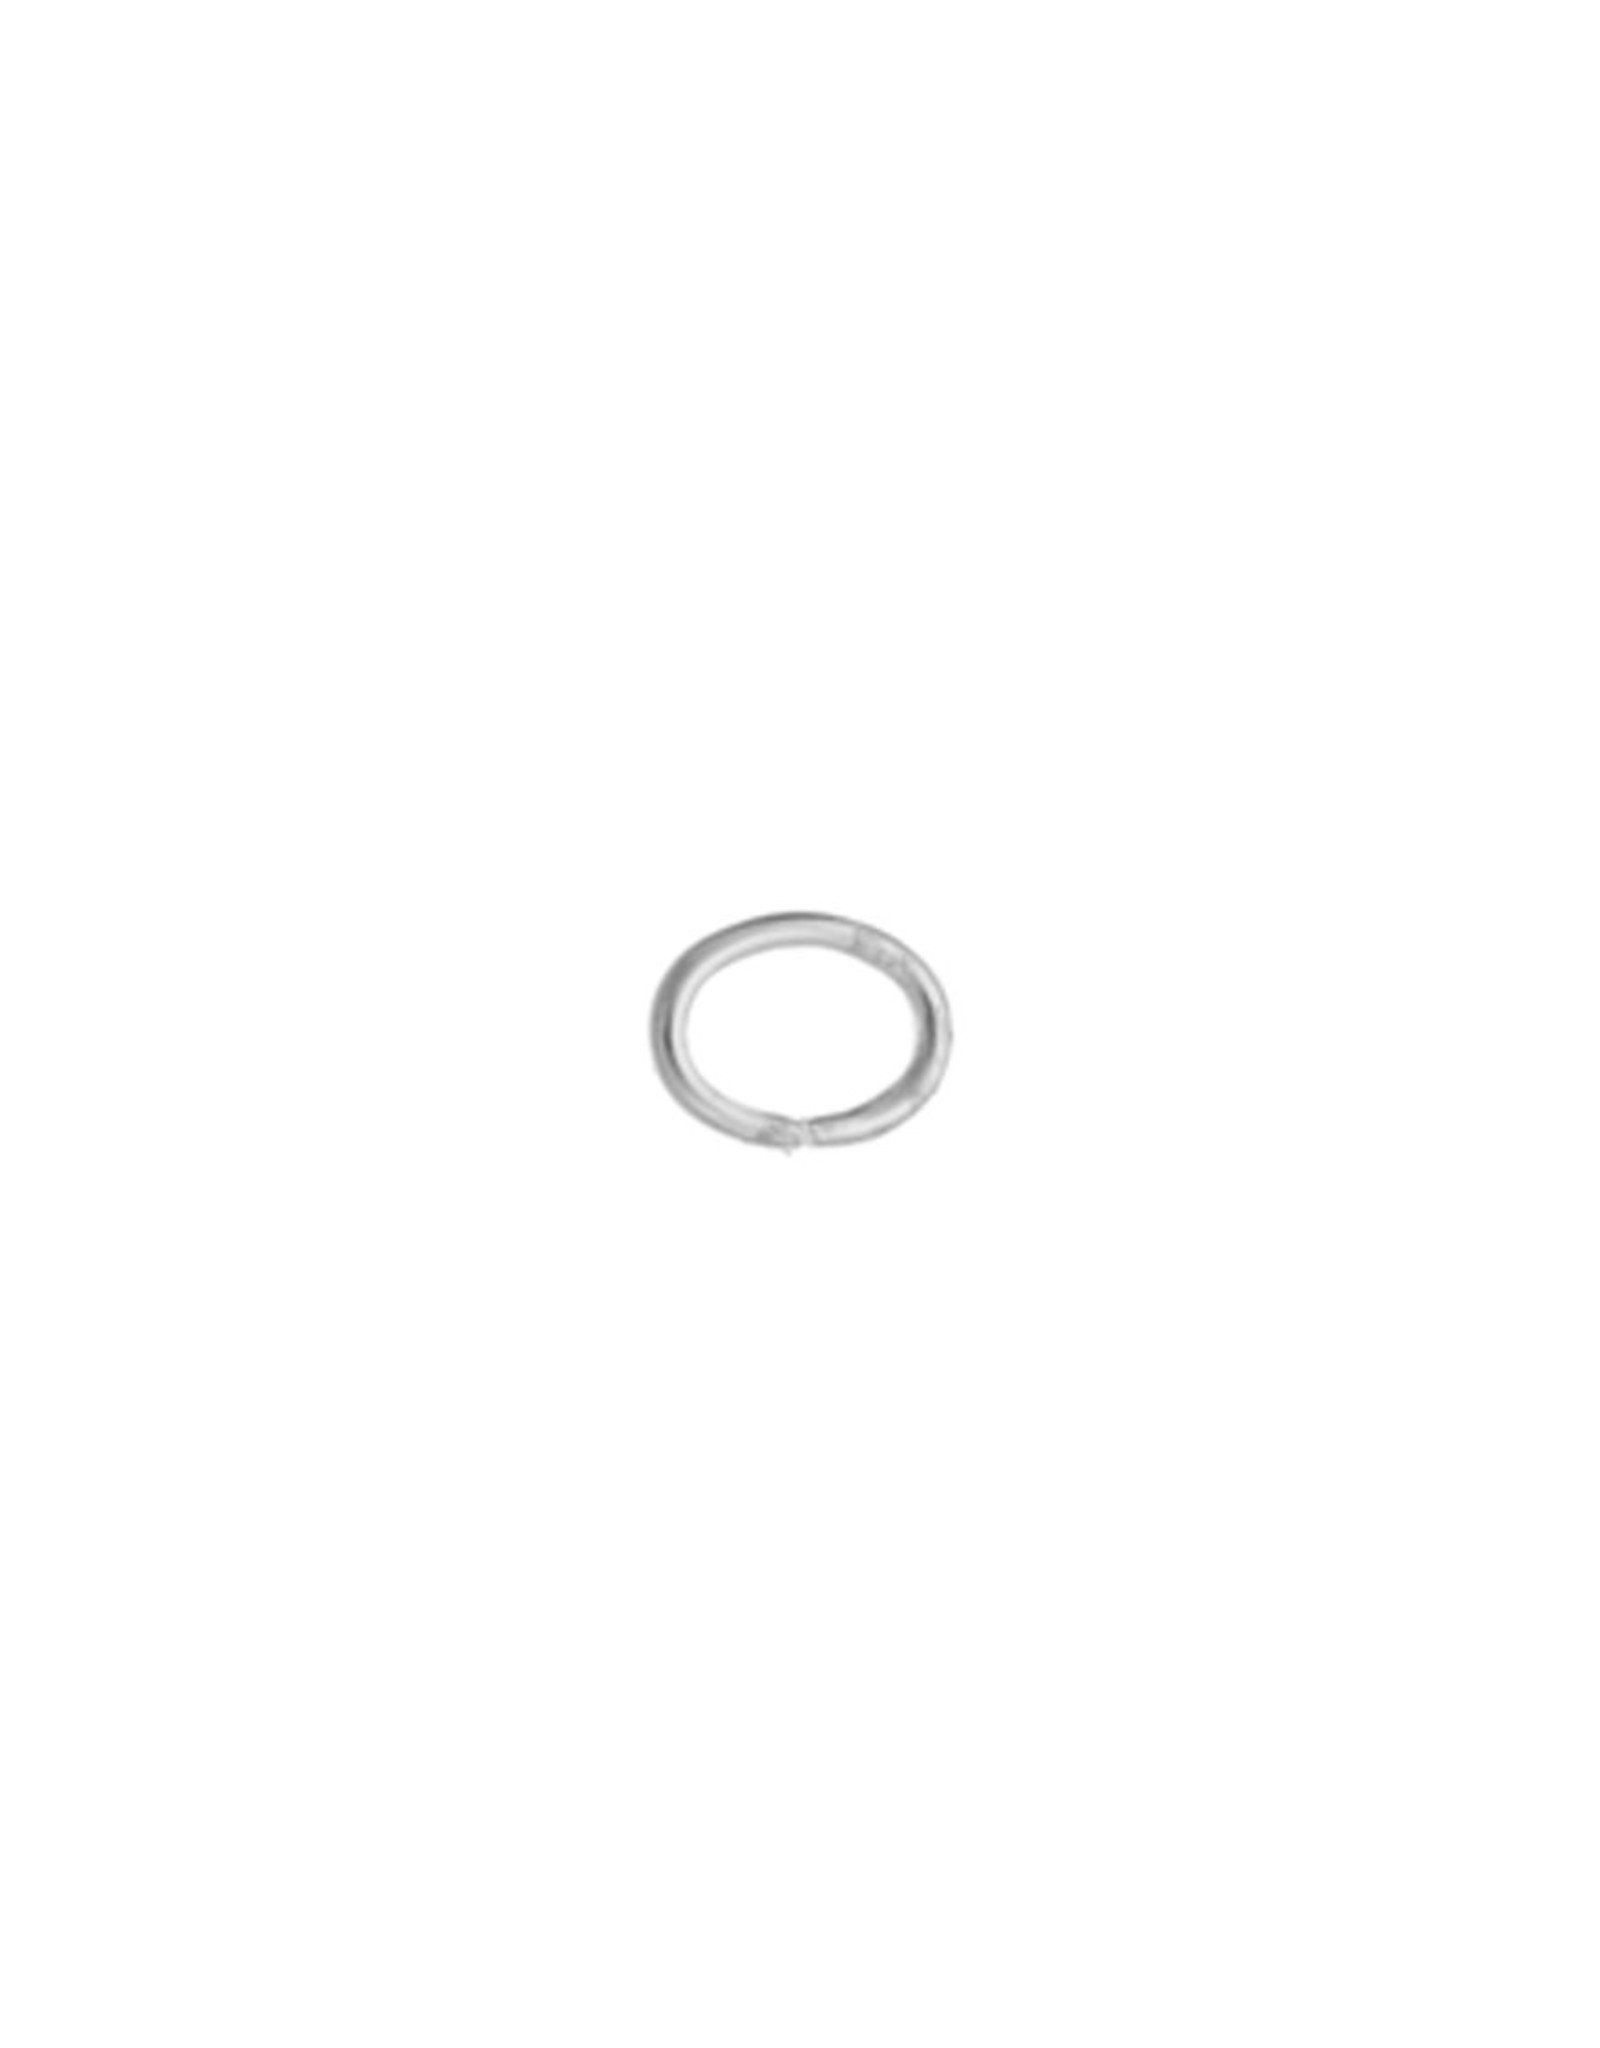 Jump Ring 4x5mm Oval 21g Silver x100 NF